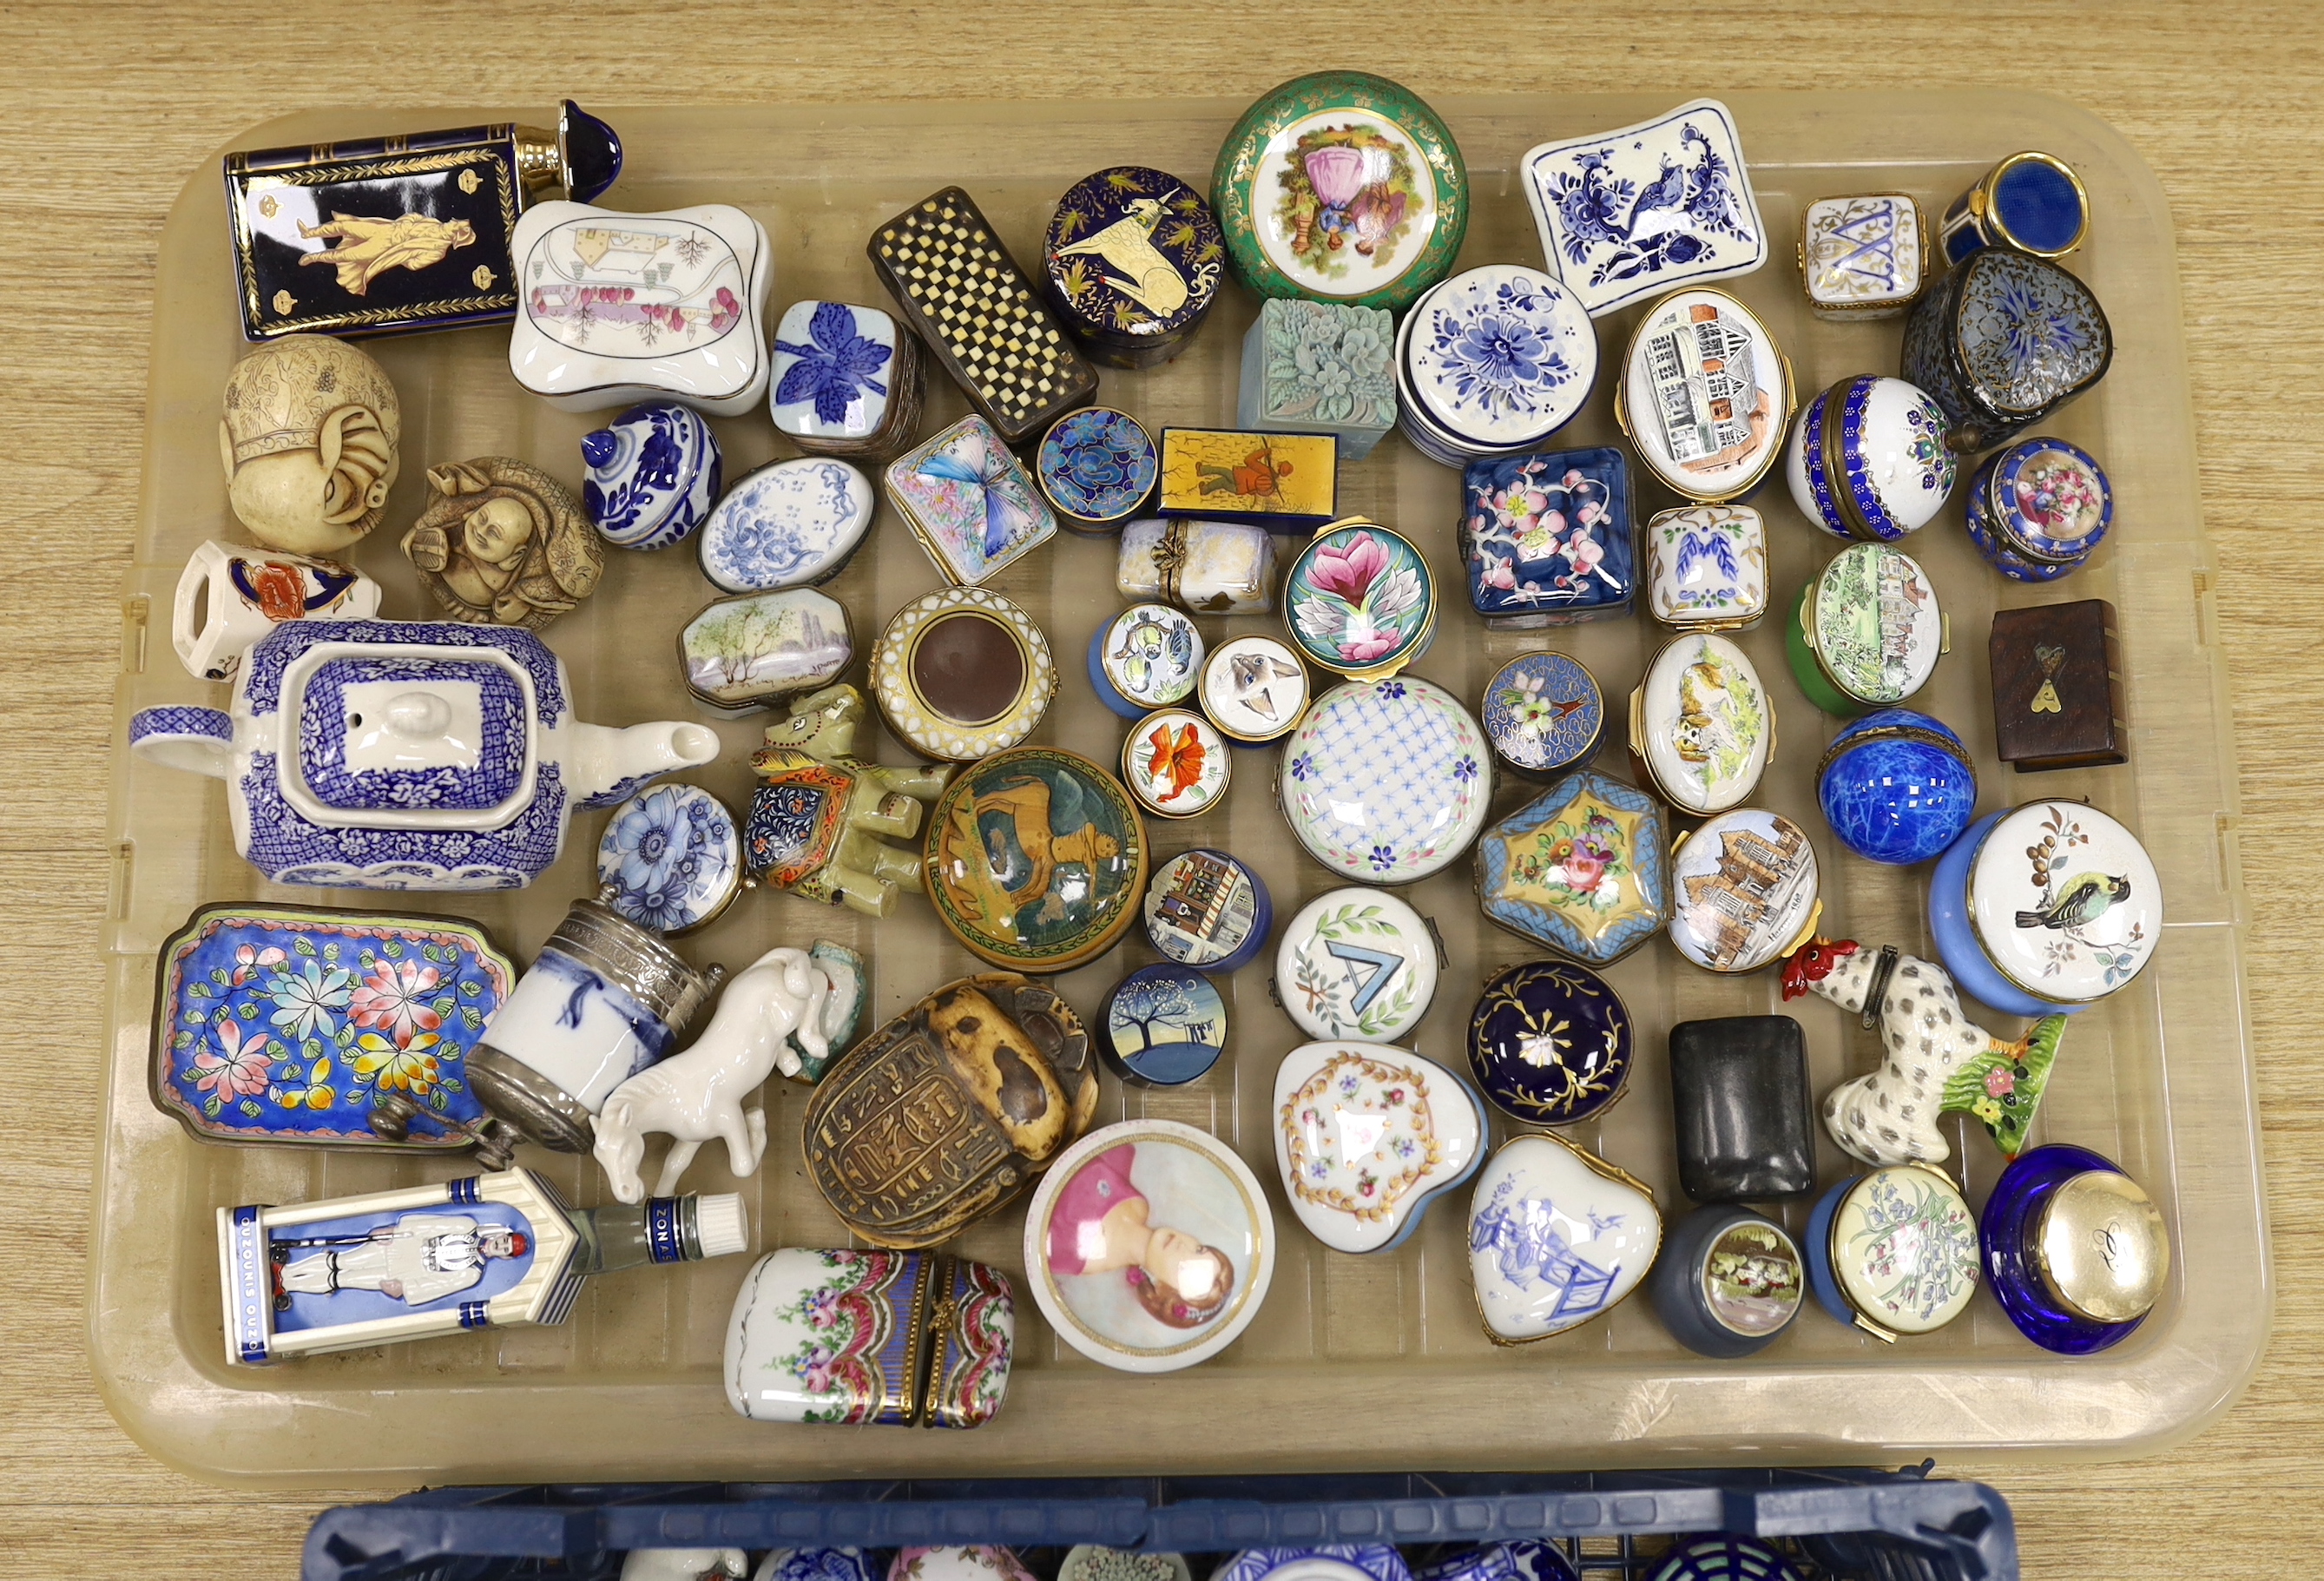 A collection of miniature boxes, snuff boxes, pillboxes and other miniature novelty items